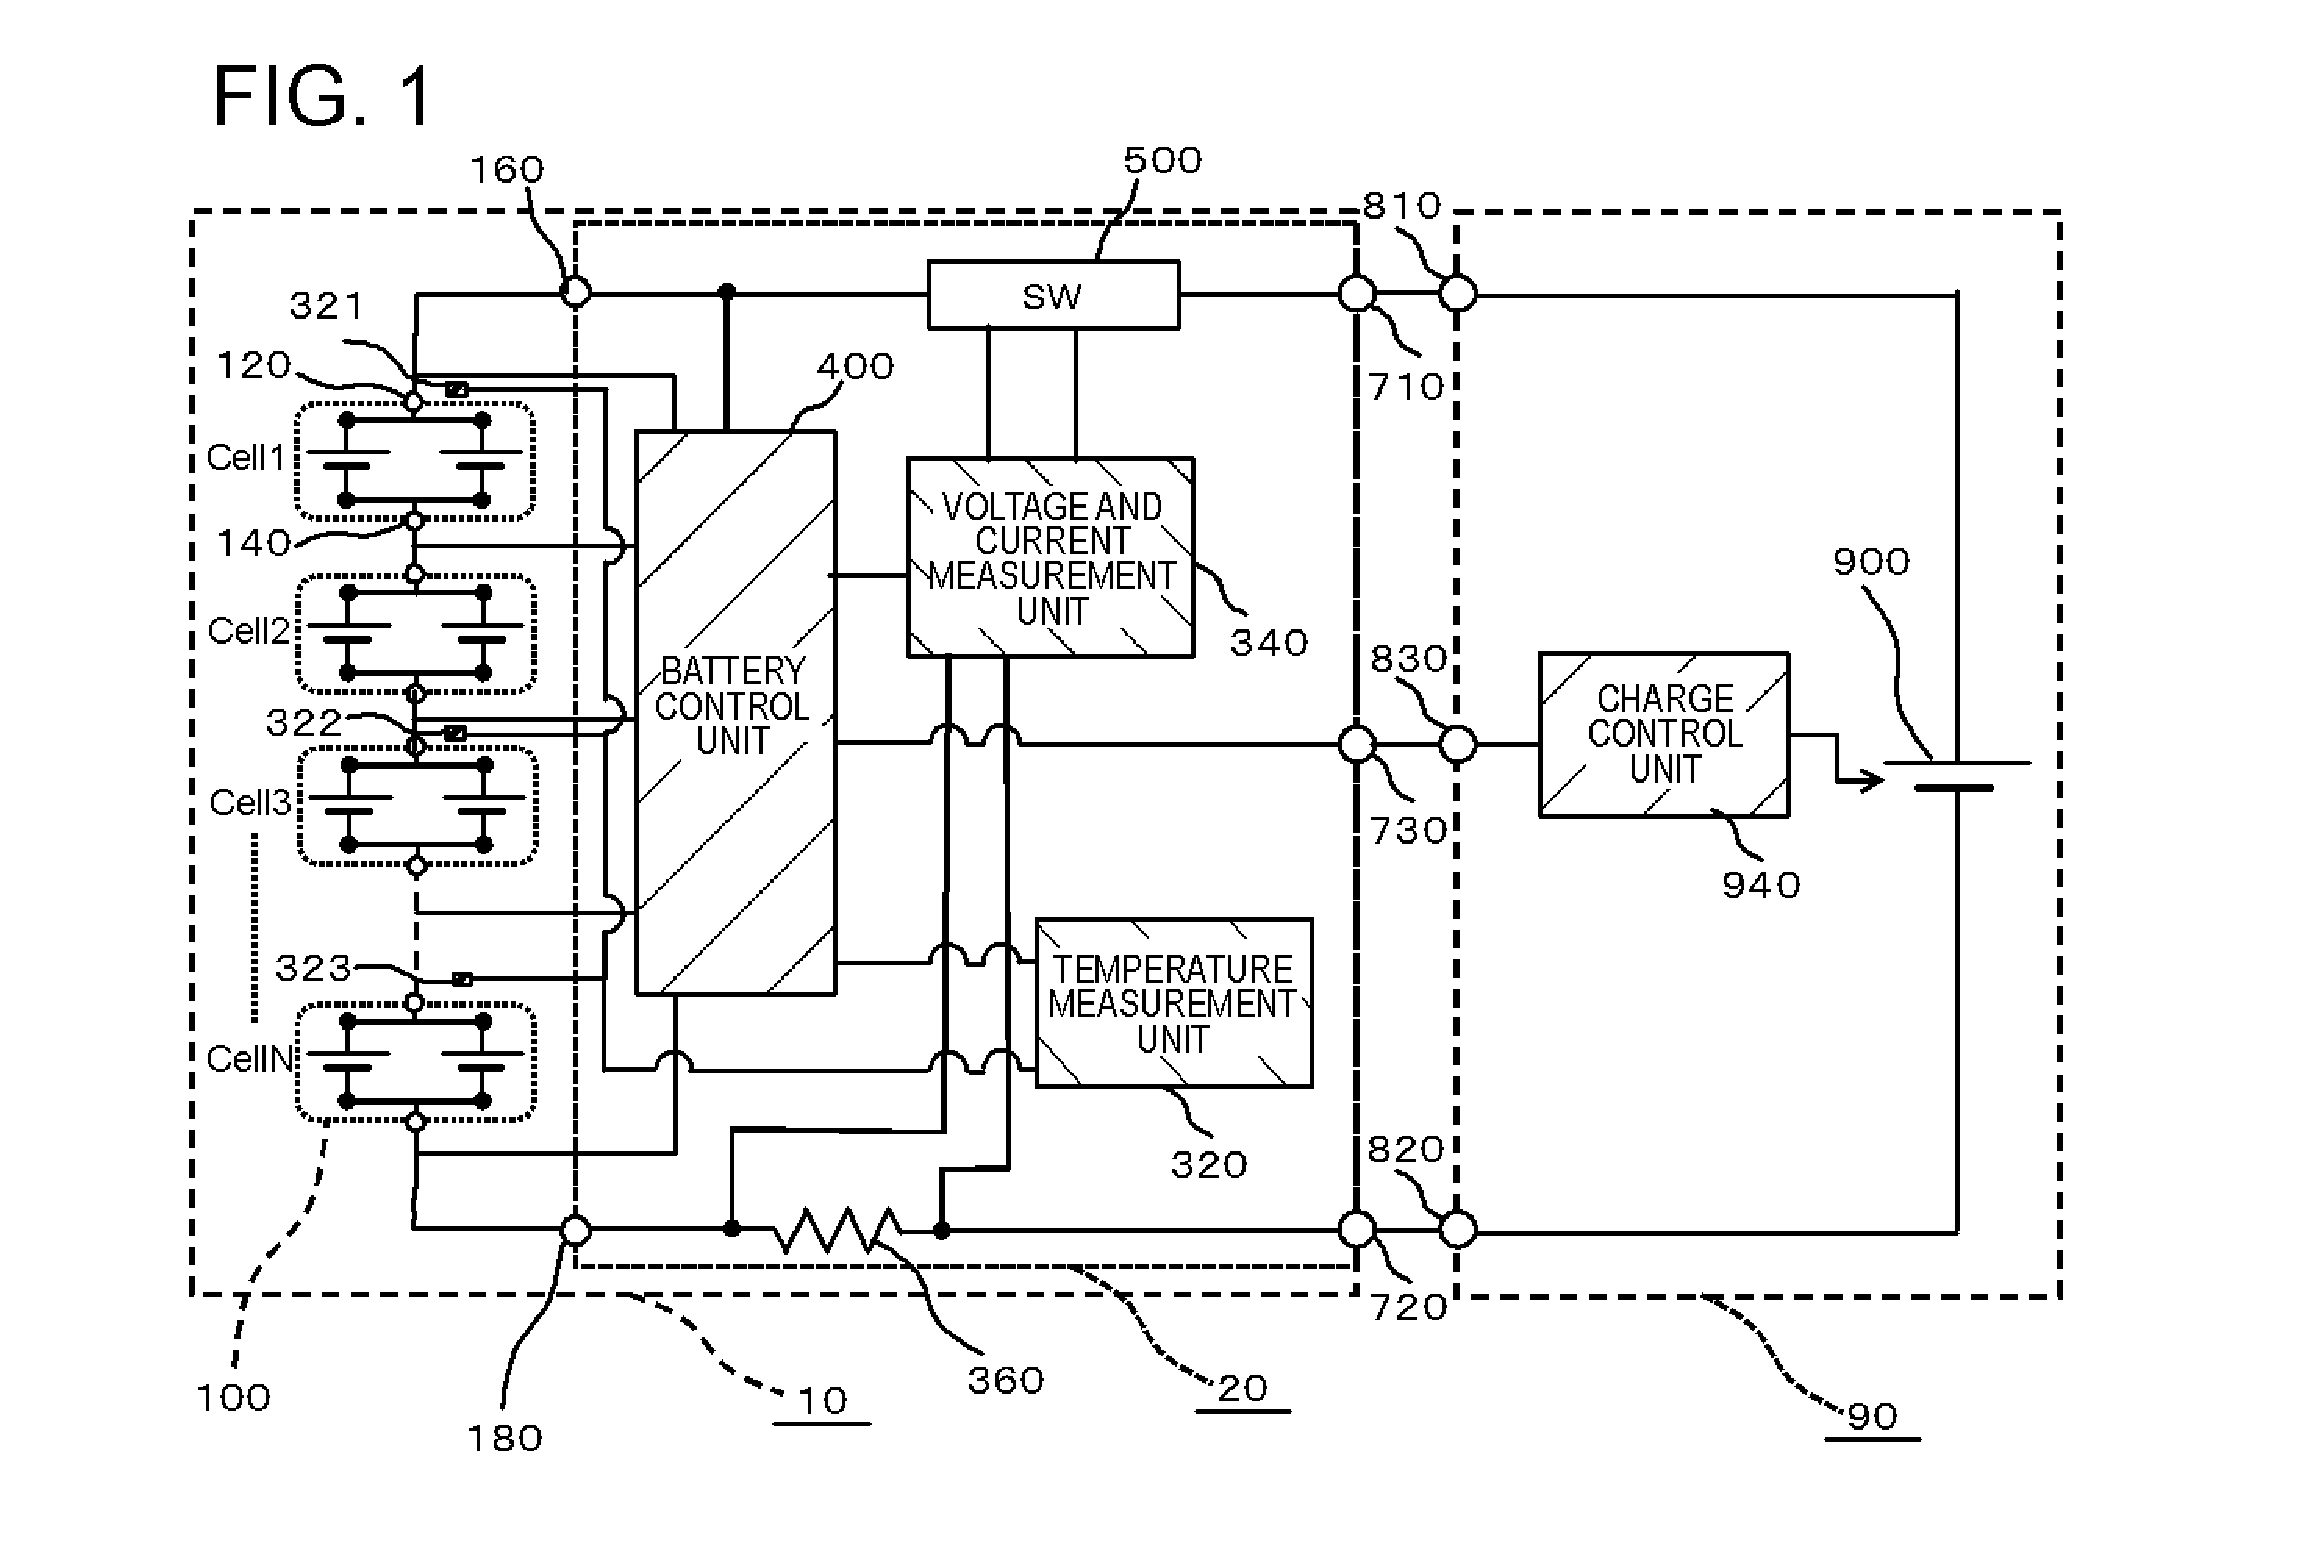 Battery control system and battery pack